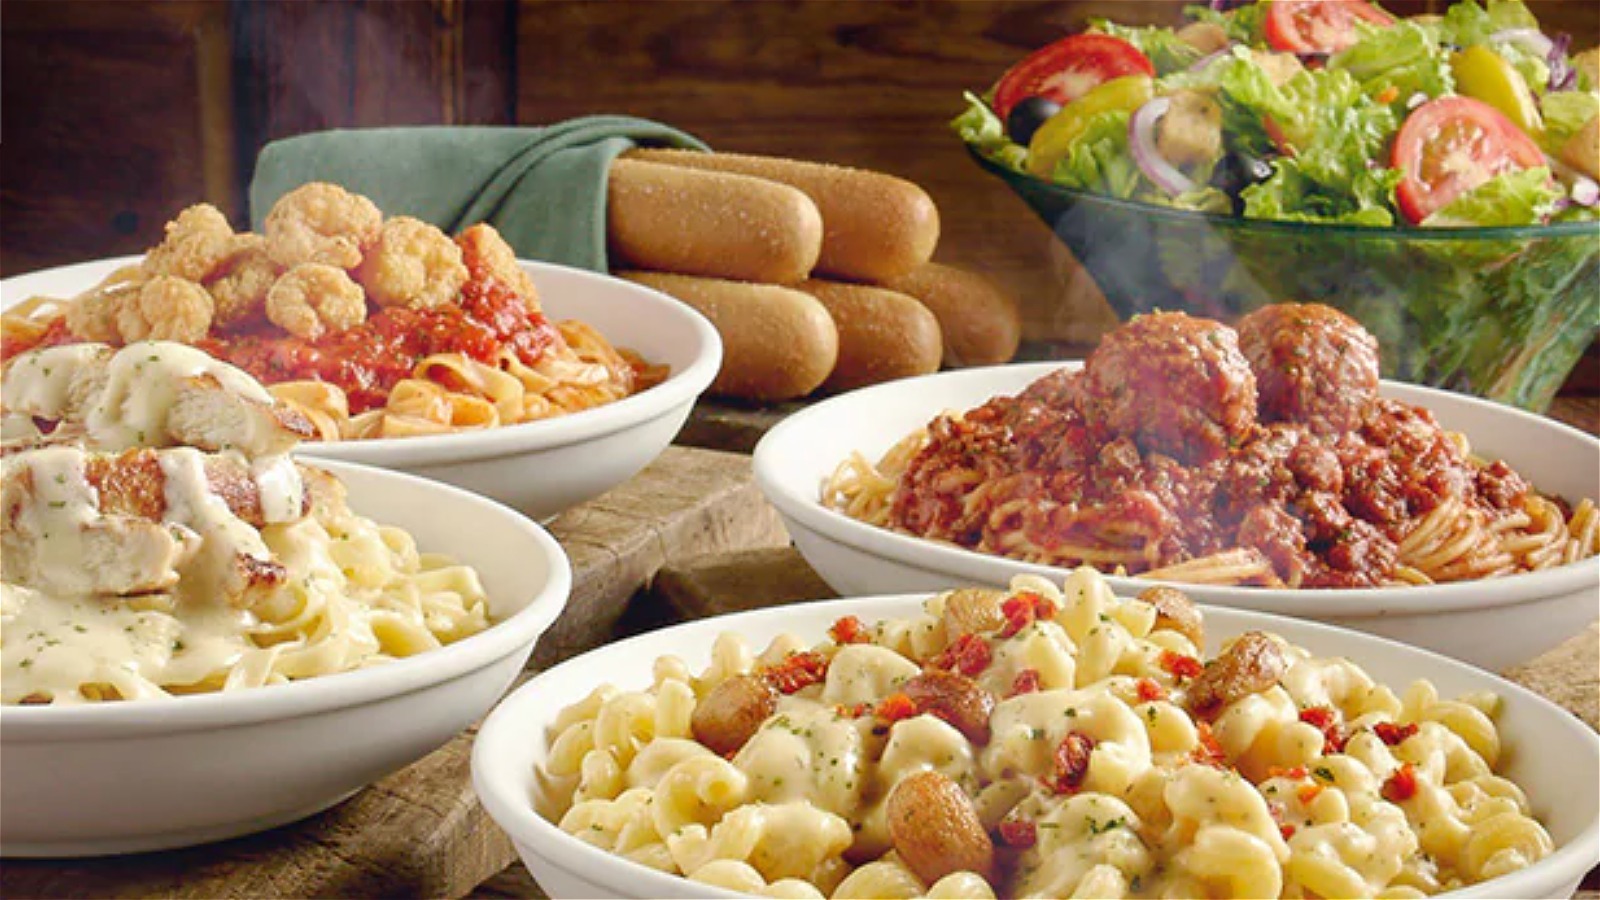 Olive Garden May Be Getting Rid of This Never-Ending Menu Item For Good